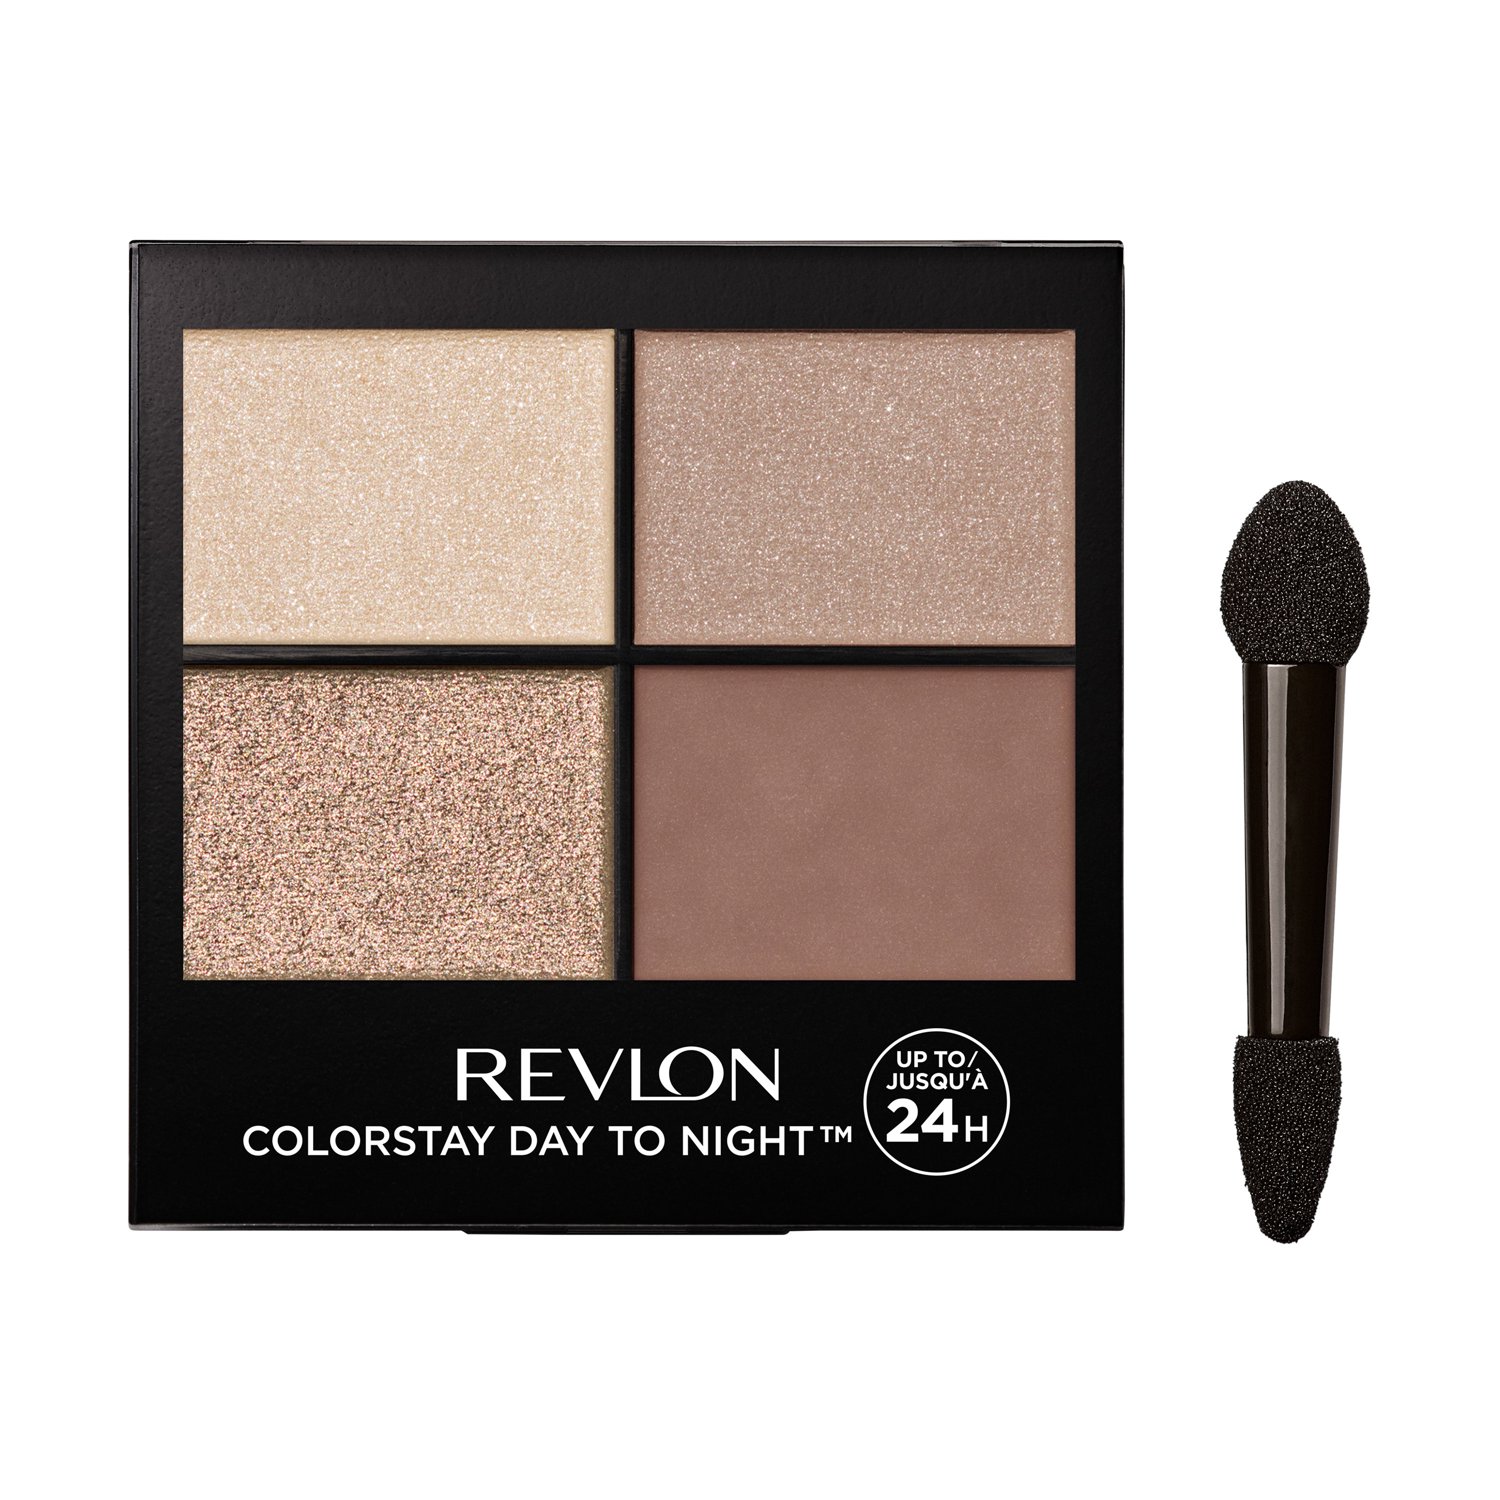 Revlon ColorStay Day to Night Long Lasting Matte and Shimmer Eyeshadow Quad, 500 Addictive - image 1 of 13